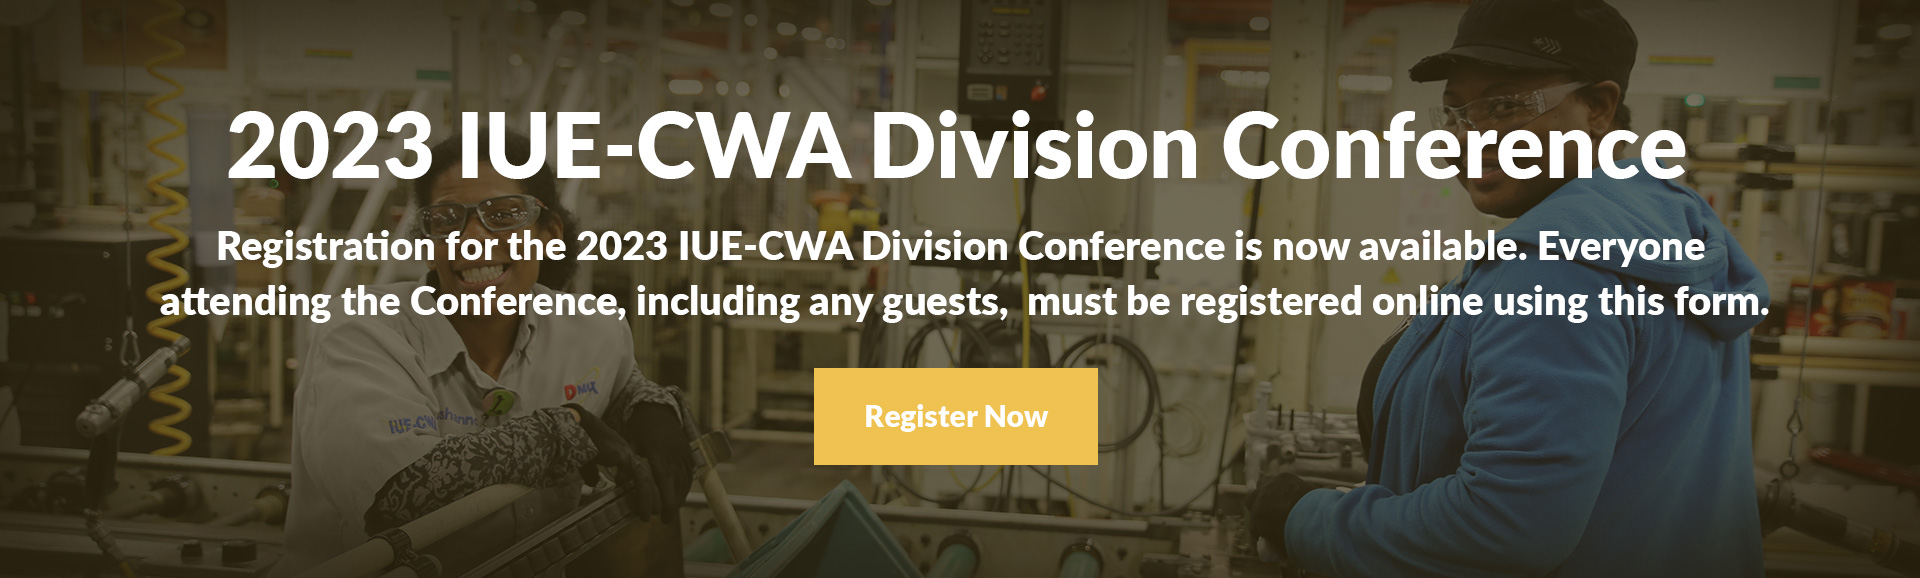 2023 IUE-CWA Division Conference Registration